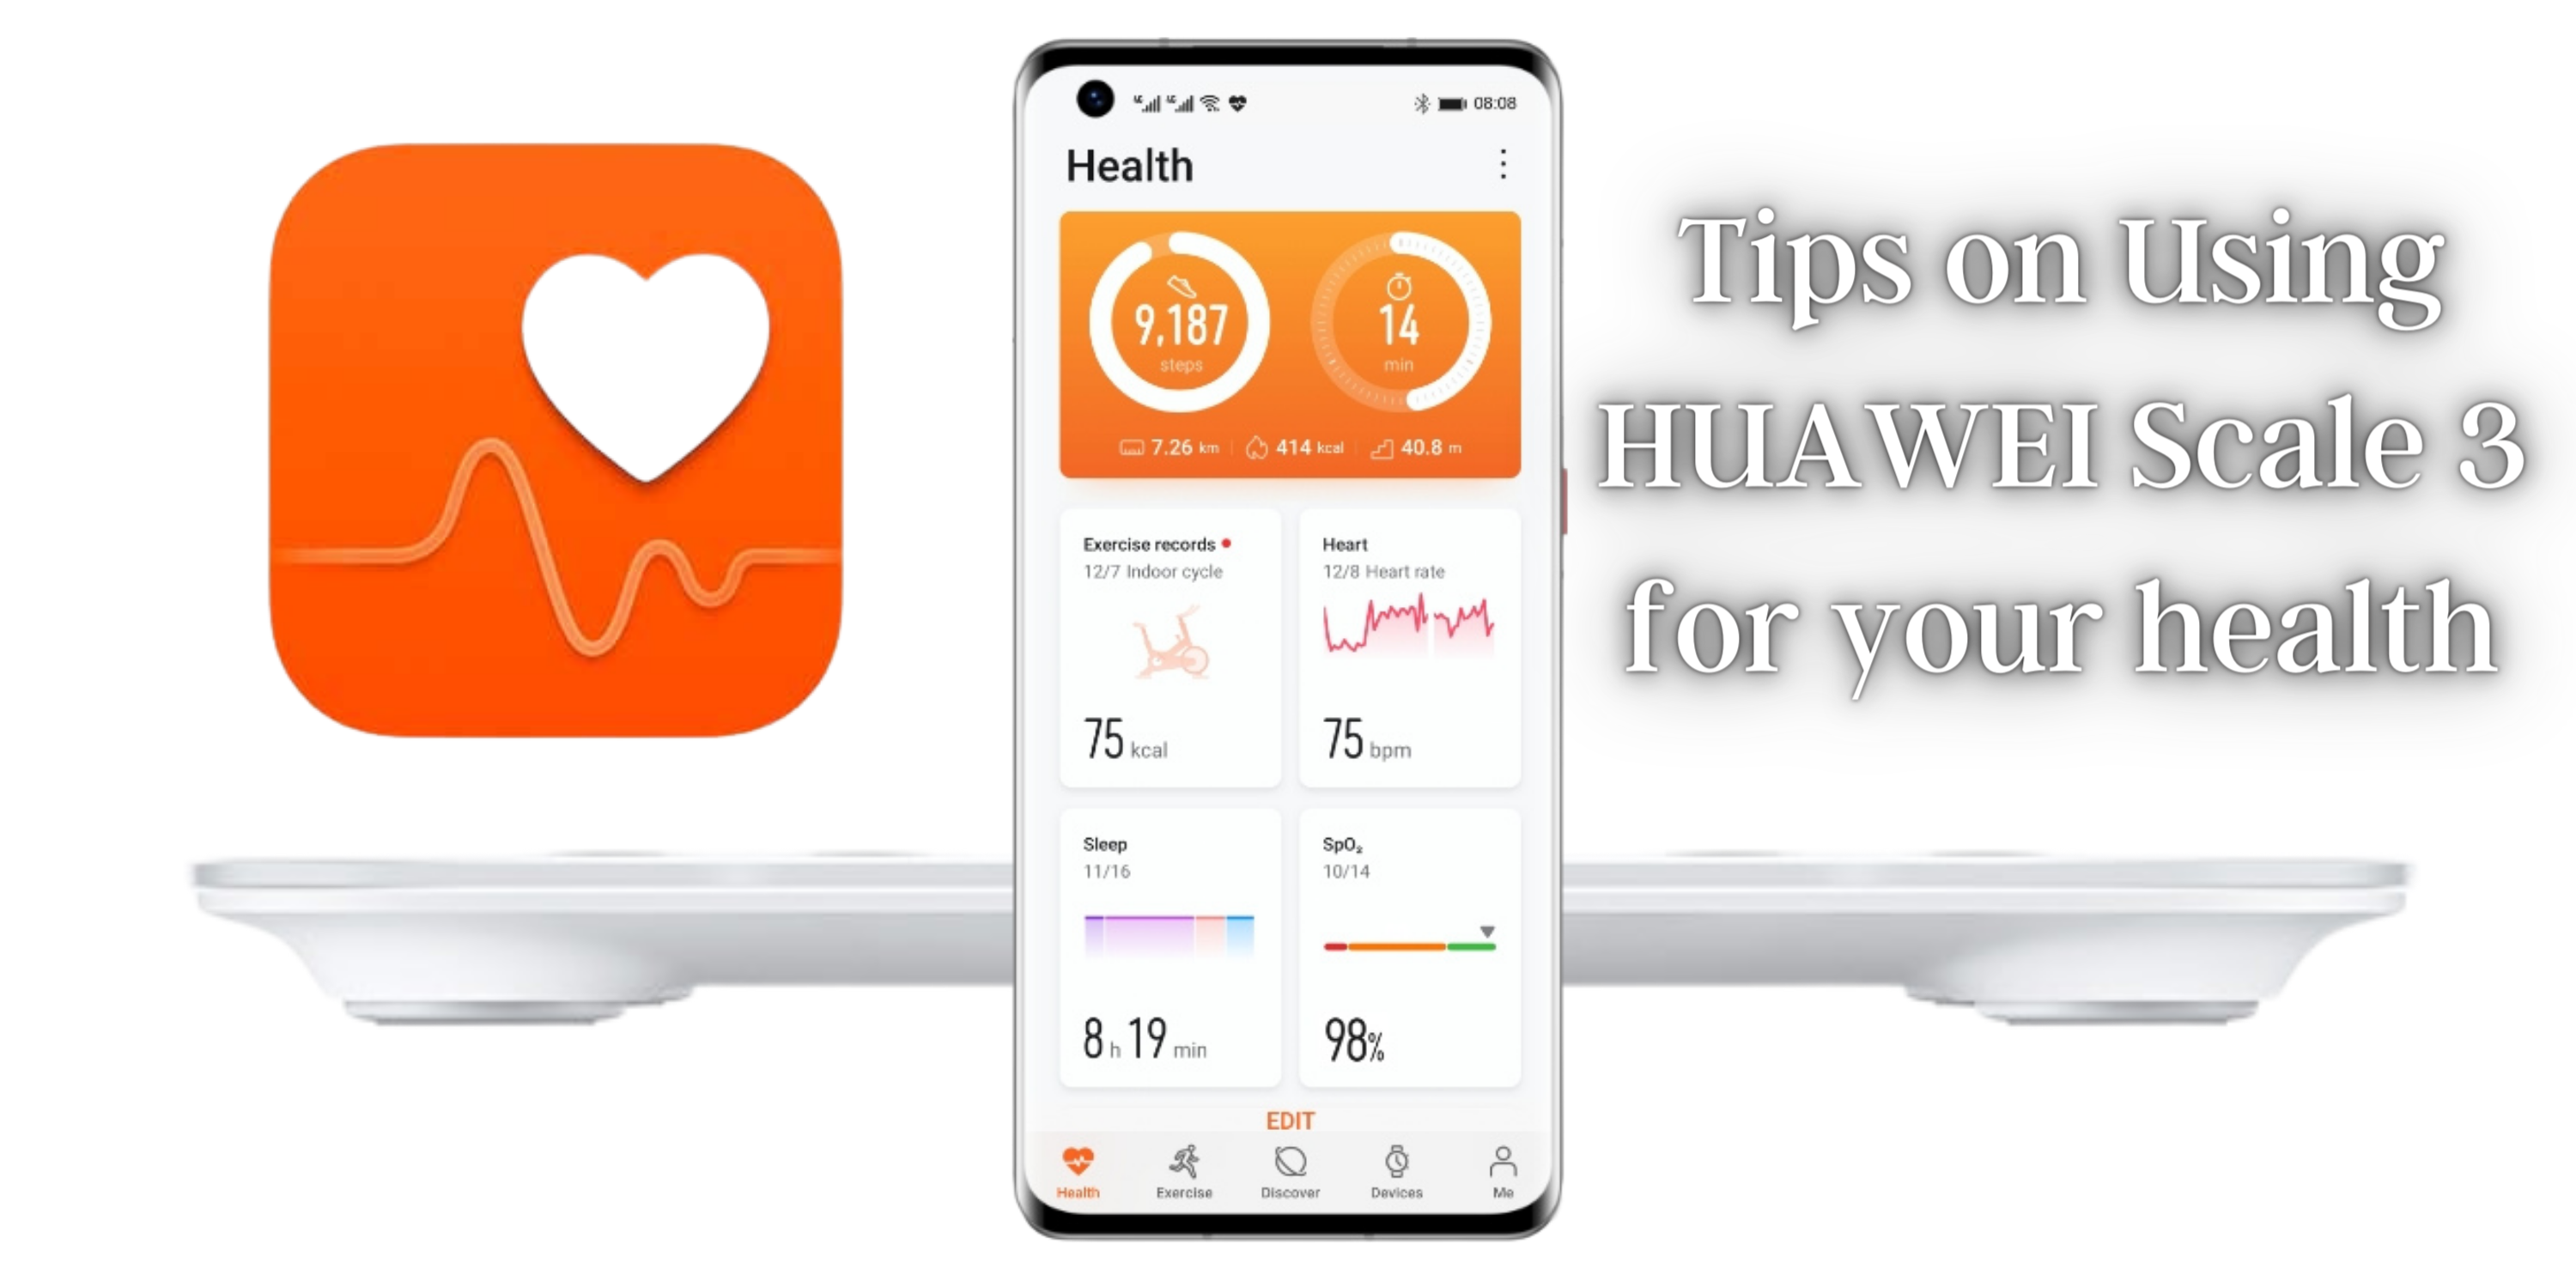 Tips on Using HUAWEI Scale 3 for your health